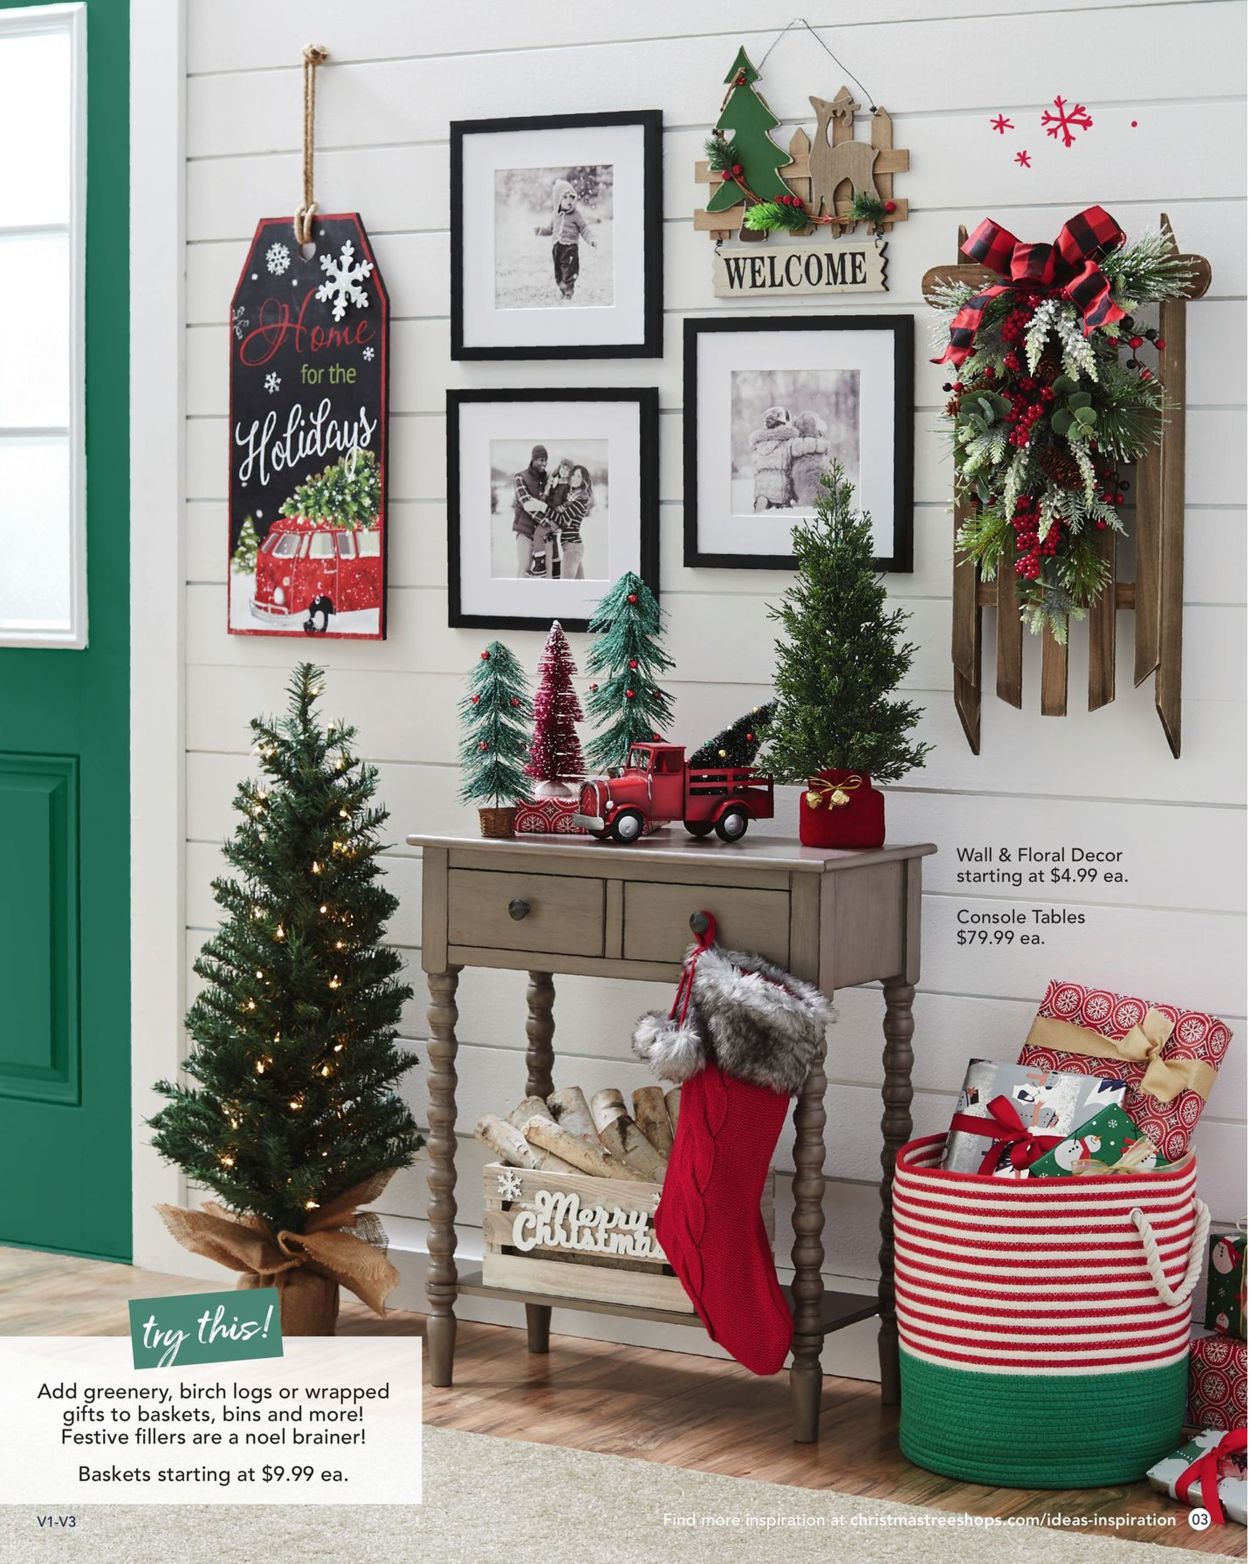 Catalogue Christmas Tree Shops CHRISTMAS 2021 from 12/01/2021